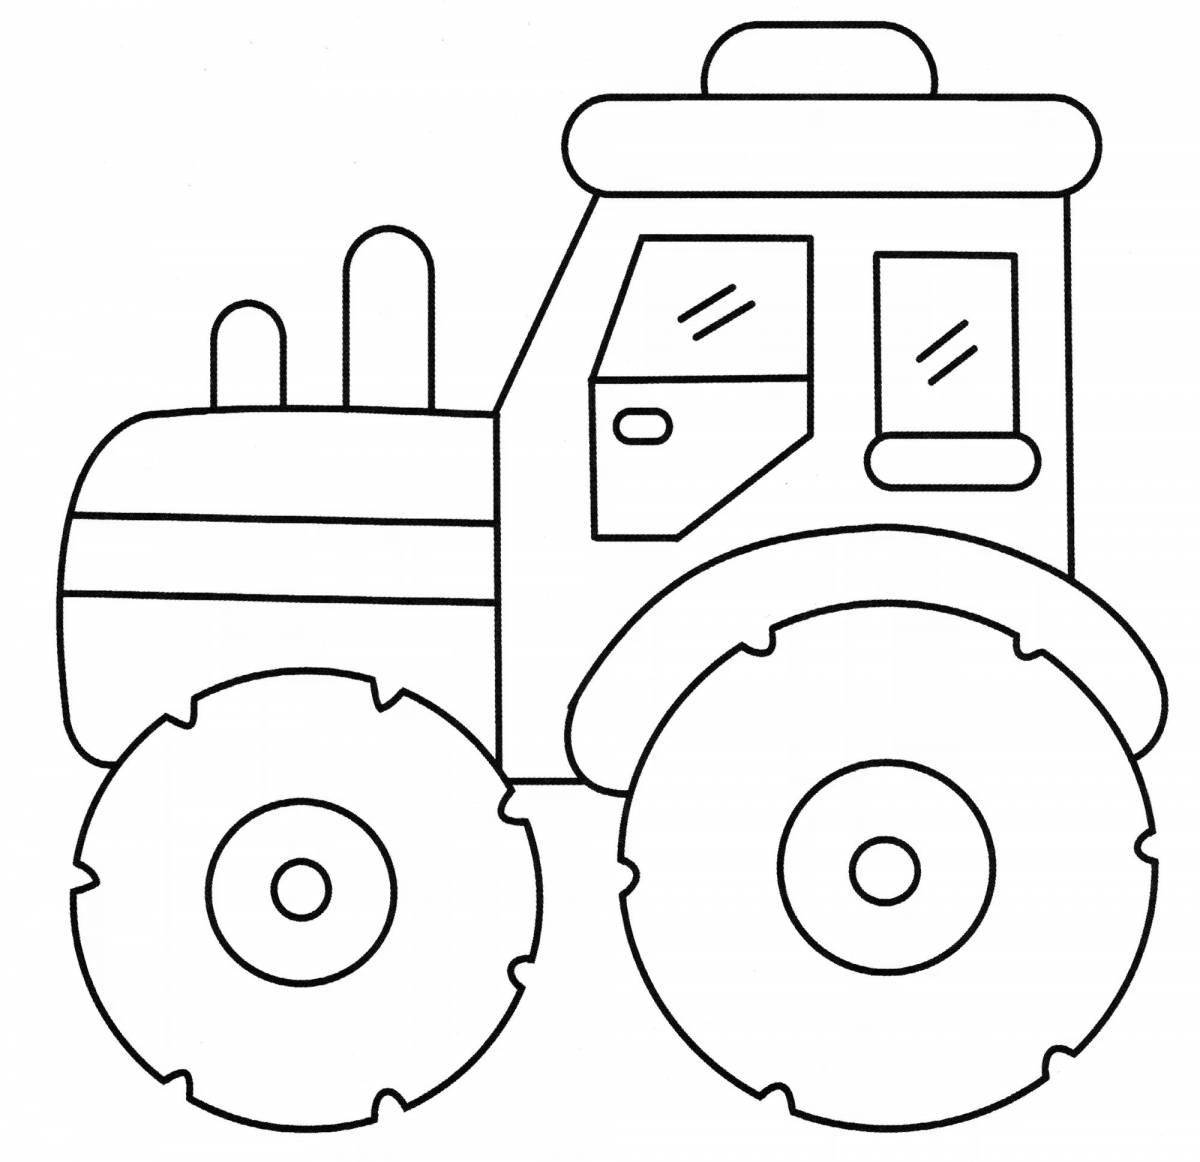 Fun tractor coloring page